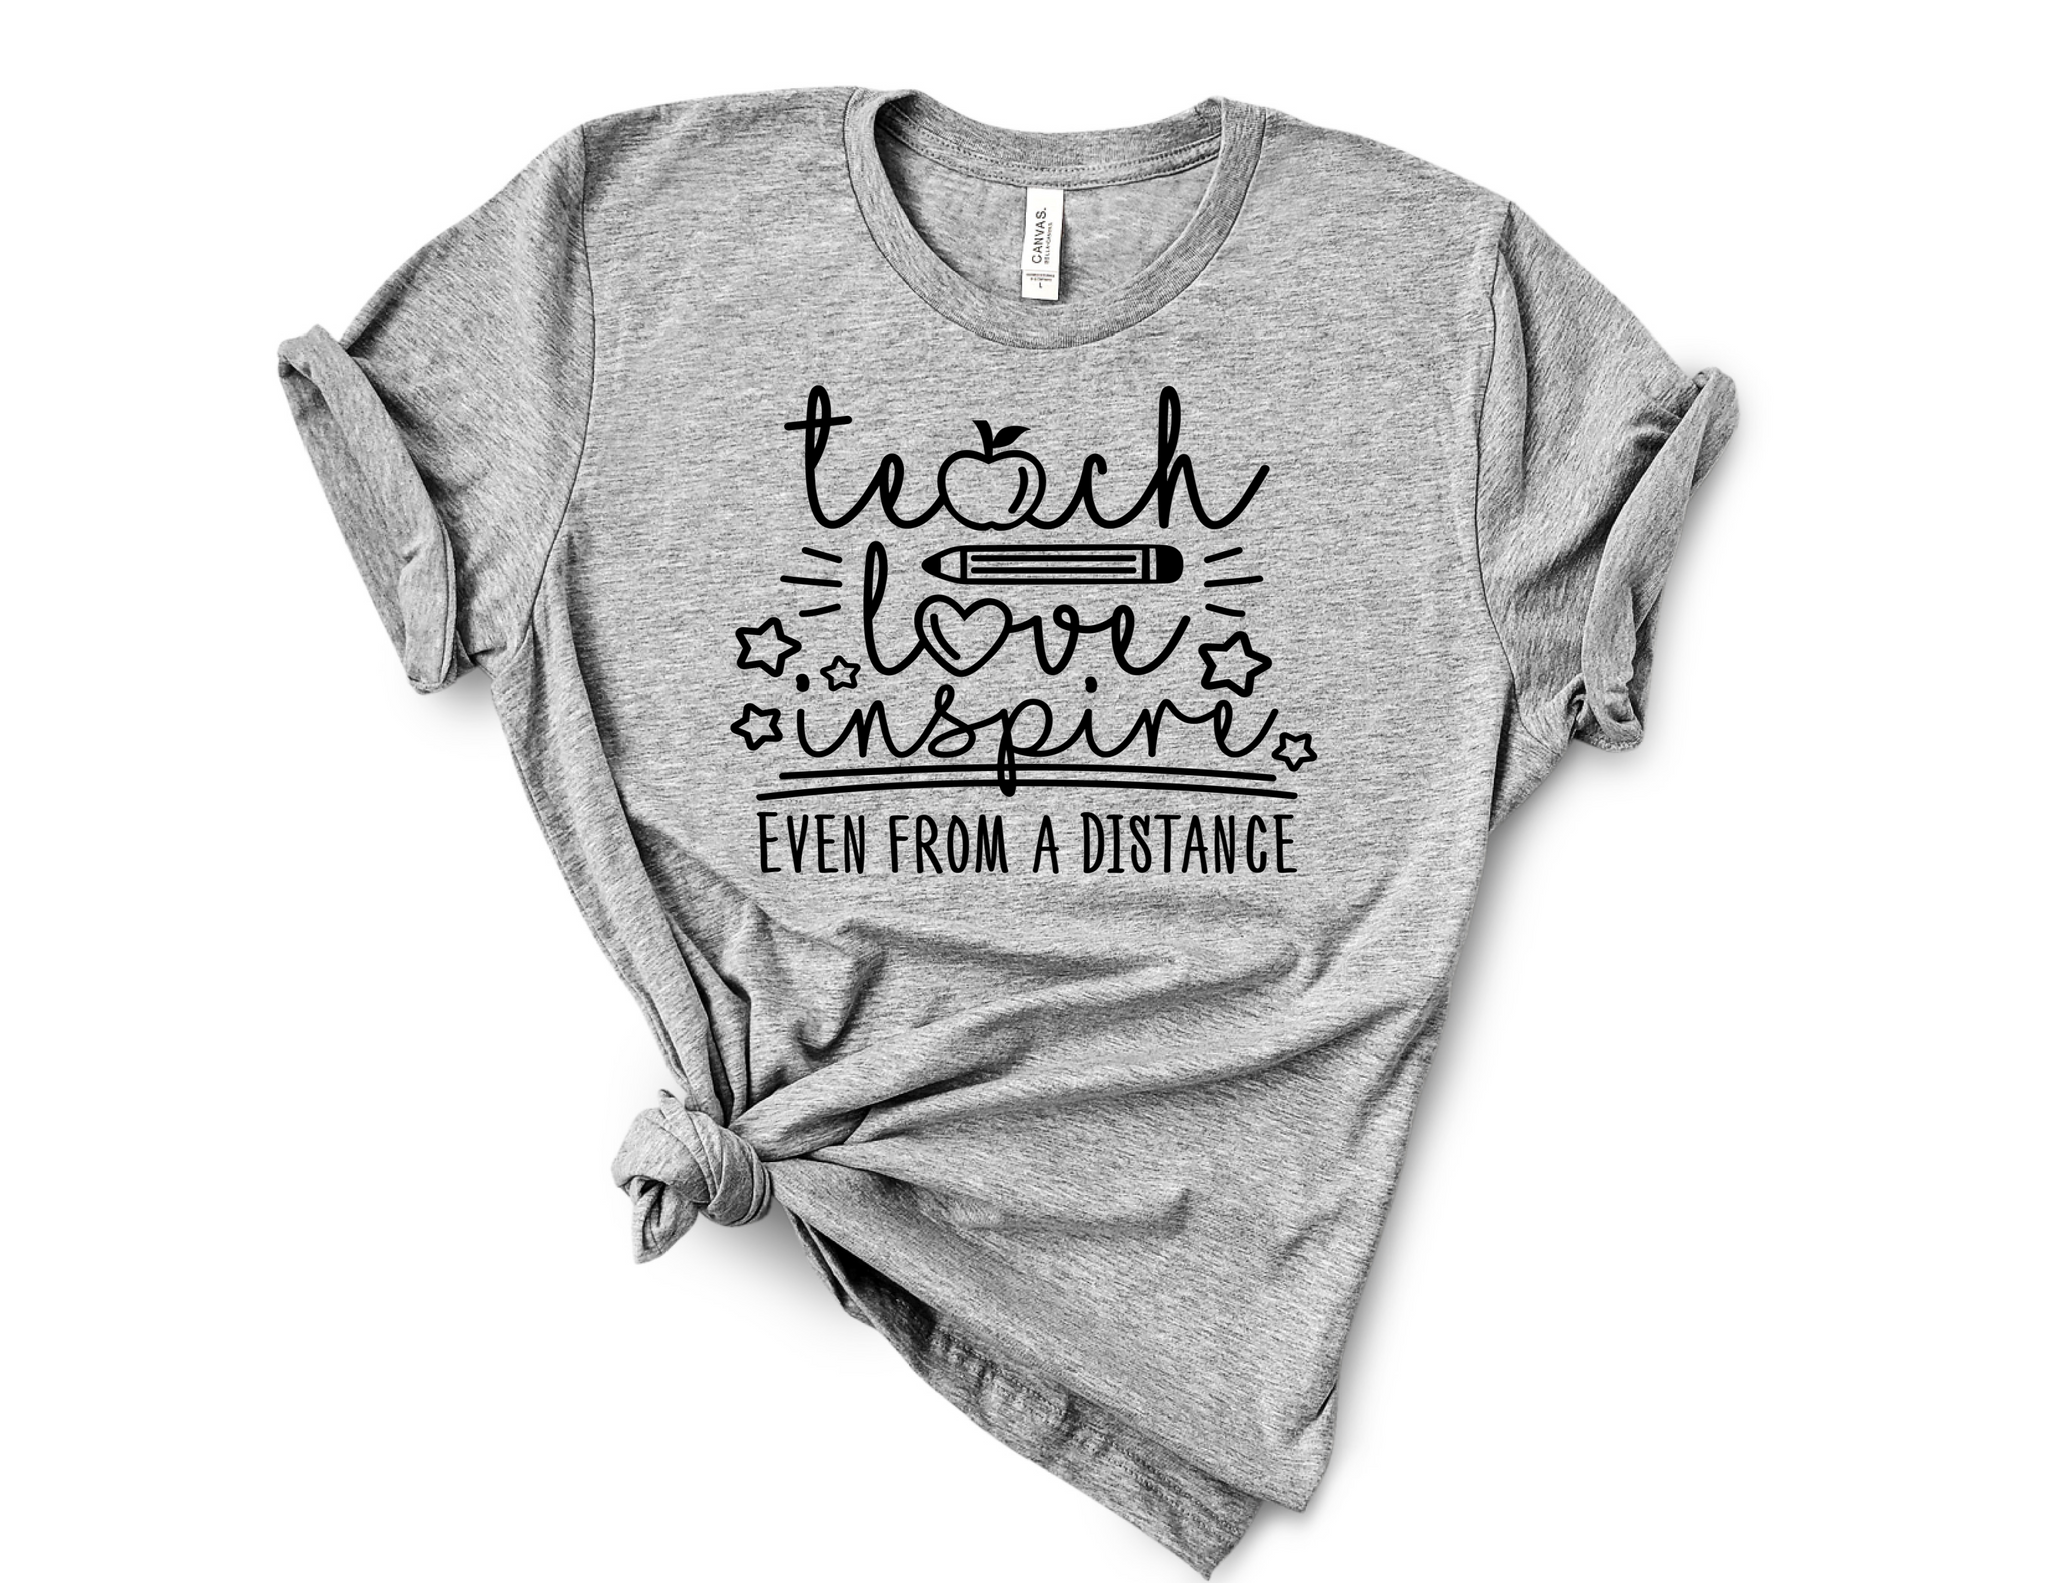 Teach Love Inspire - Even from a distance Tee